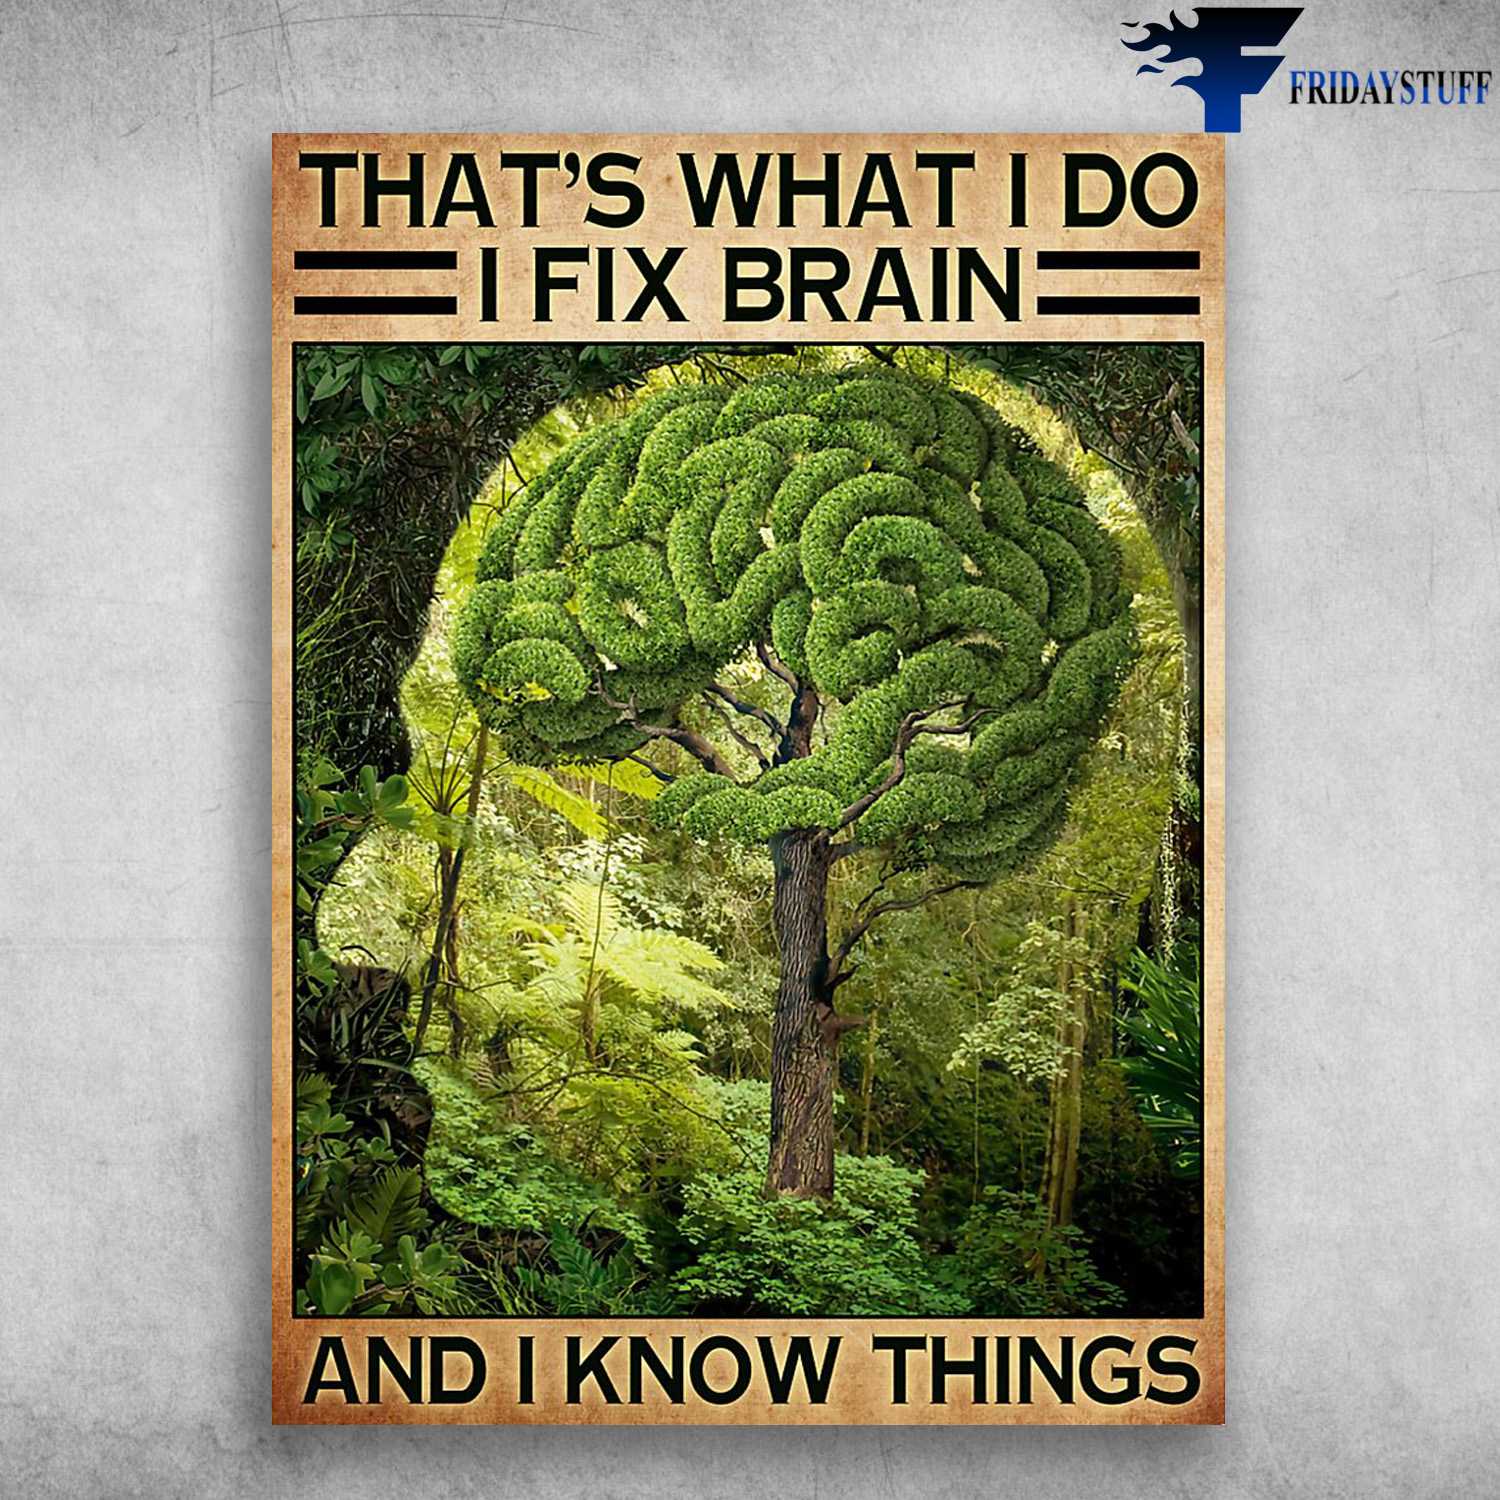 Brand Tree, Improve Your Mind - That's What I Do, I Fix Brain, And I Know Things